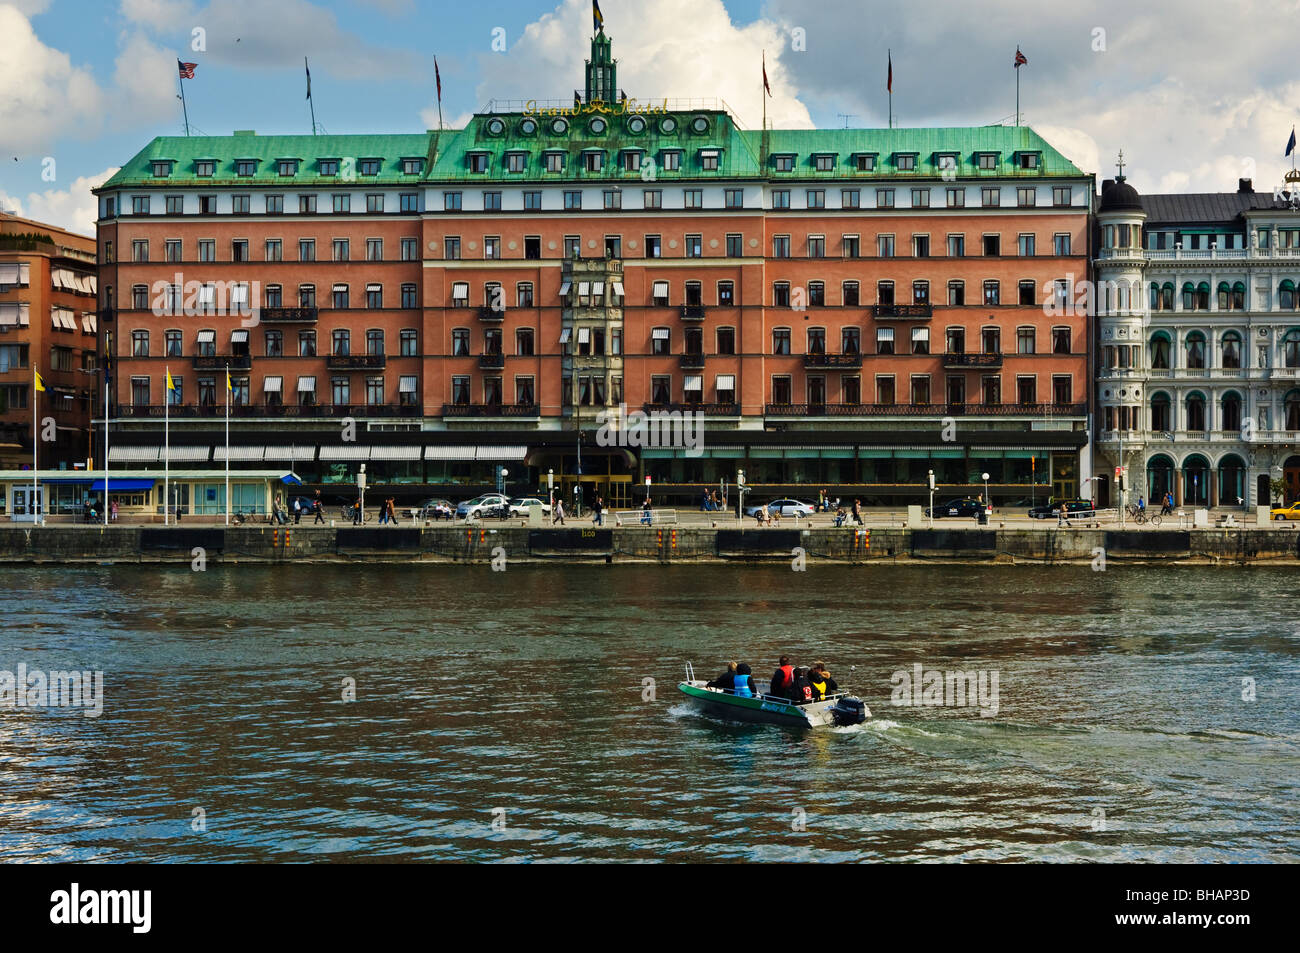 The Grand Hotel, Stockholm Sweden, closely associated with the Nobel Prizes. Prizewinners still stay here. Stock Photo